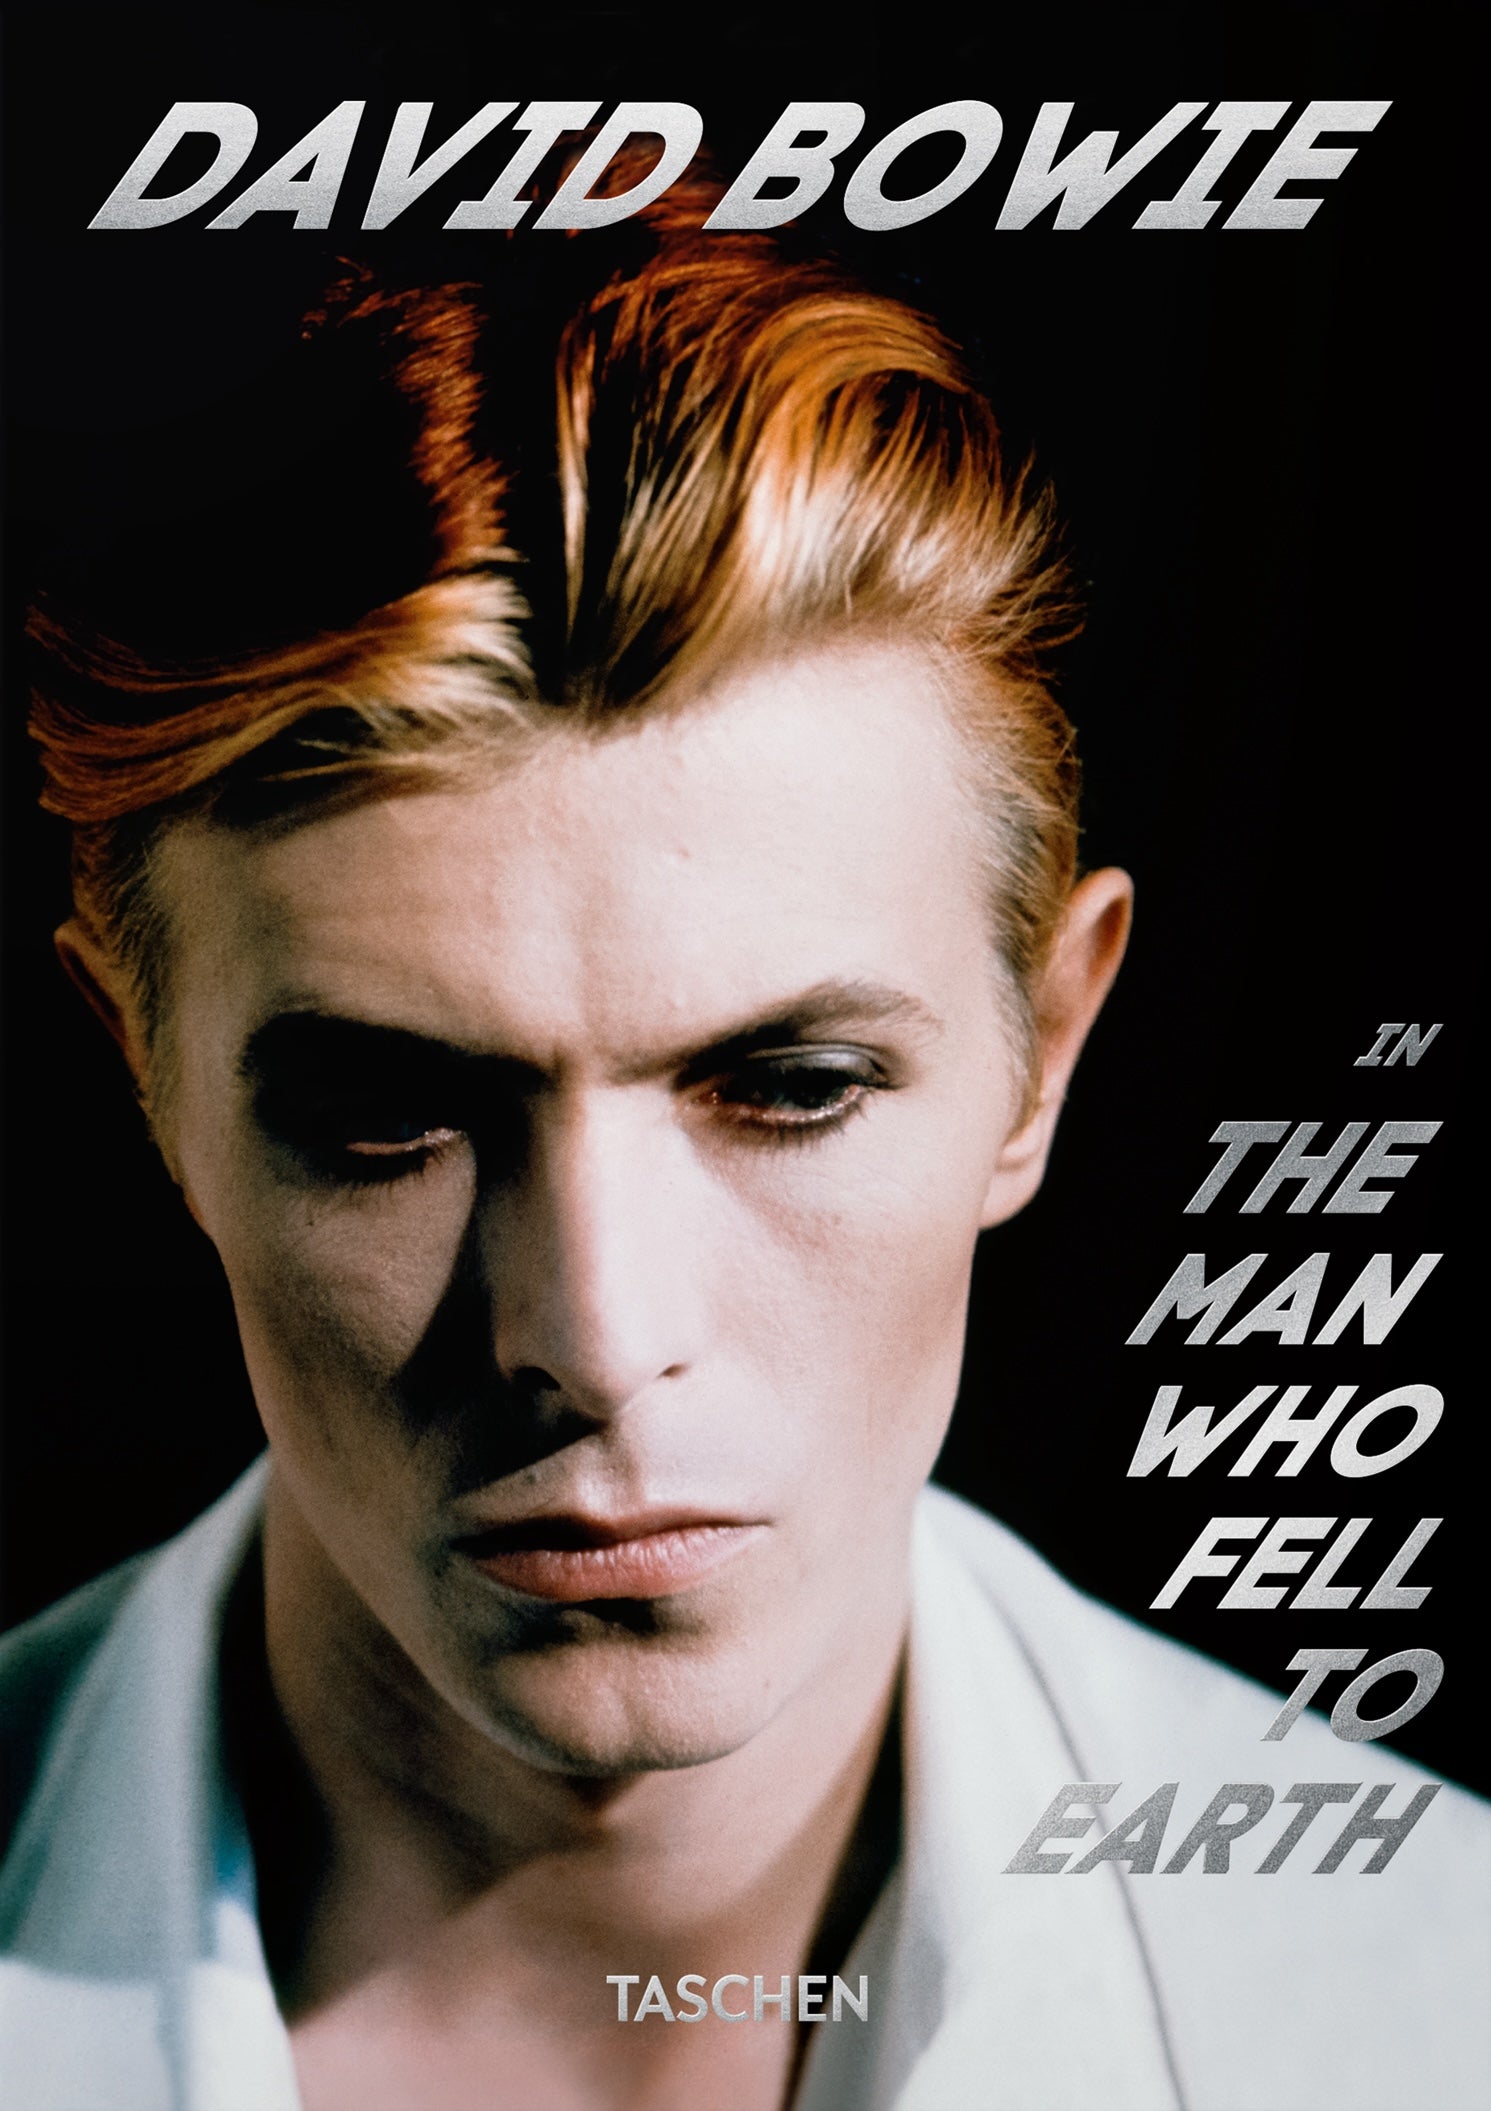 David Bowie. The Man Who Fell to Earth. 40th edt.